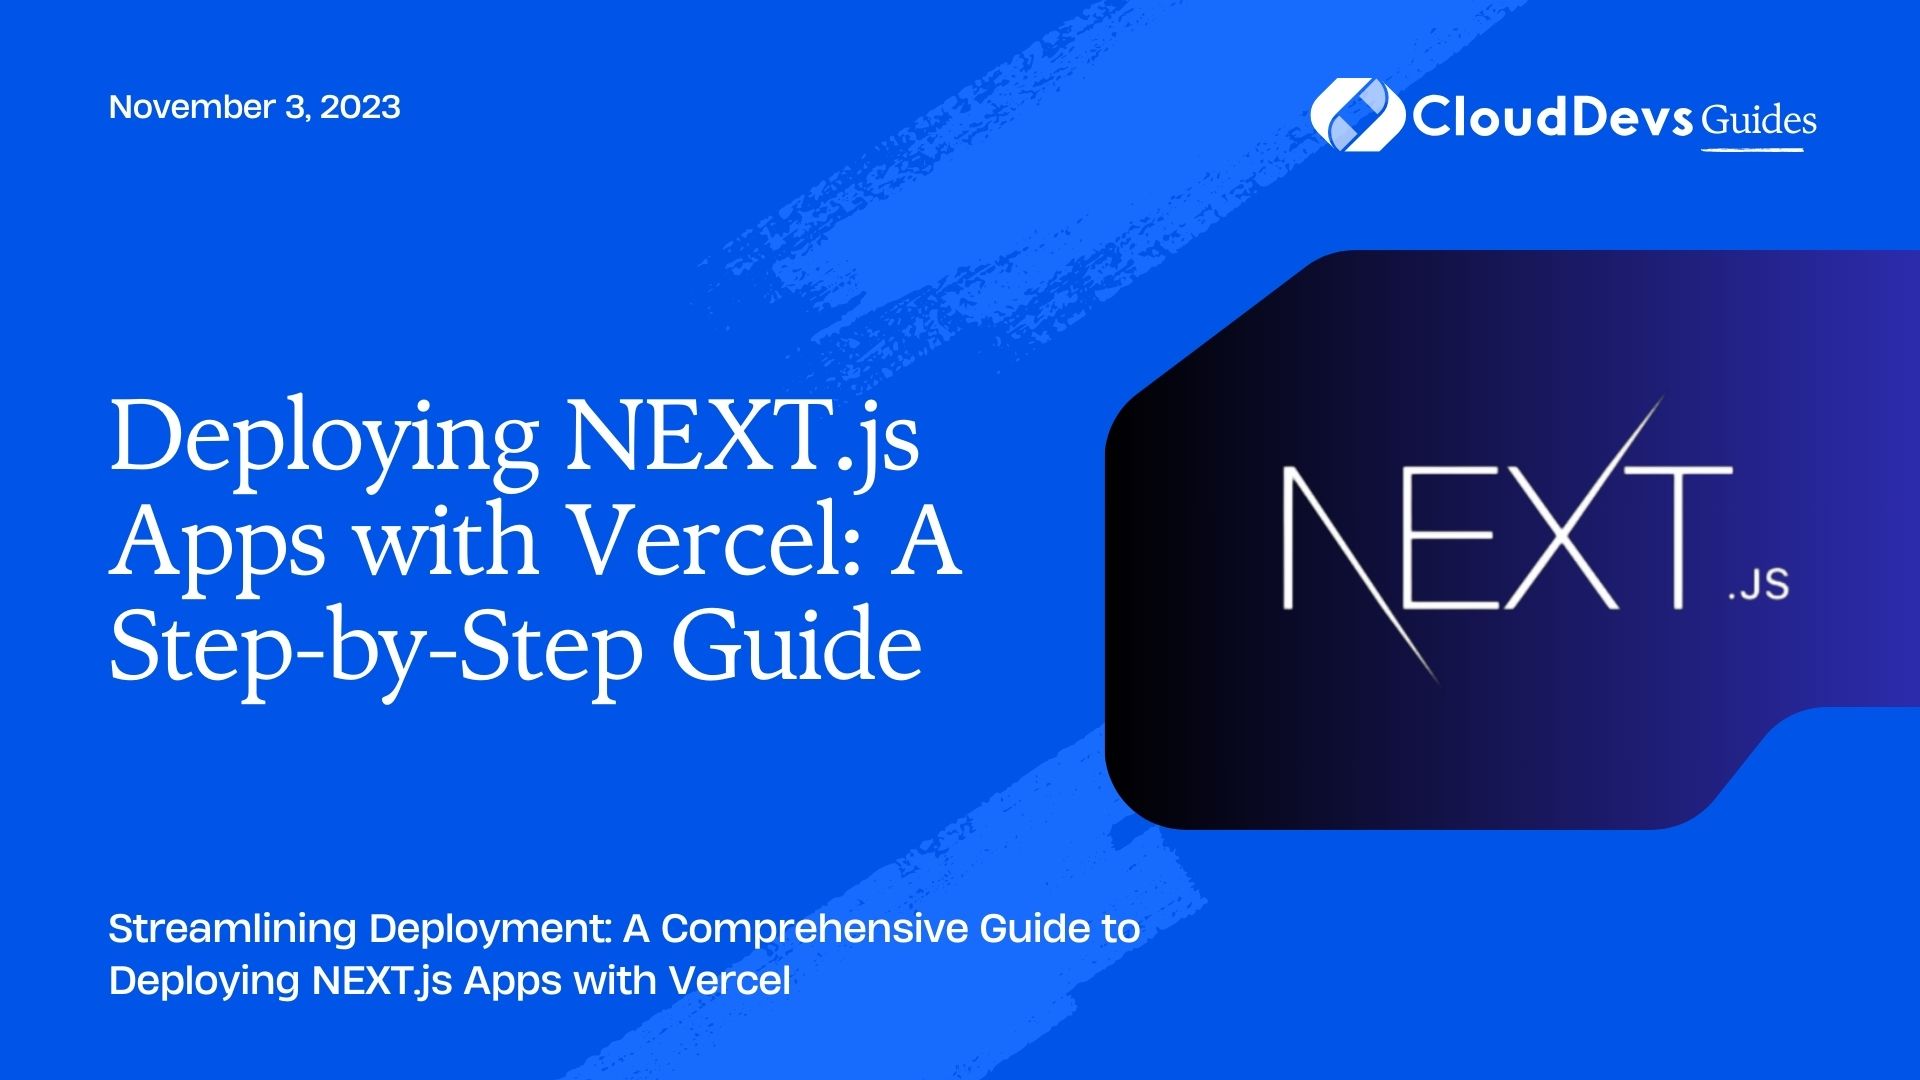 Deploying NEXT.js Apps with Vercel: A Step-by-Step Guide